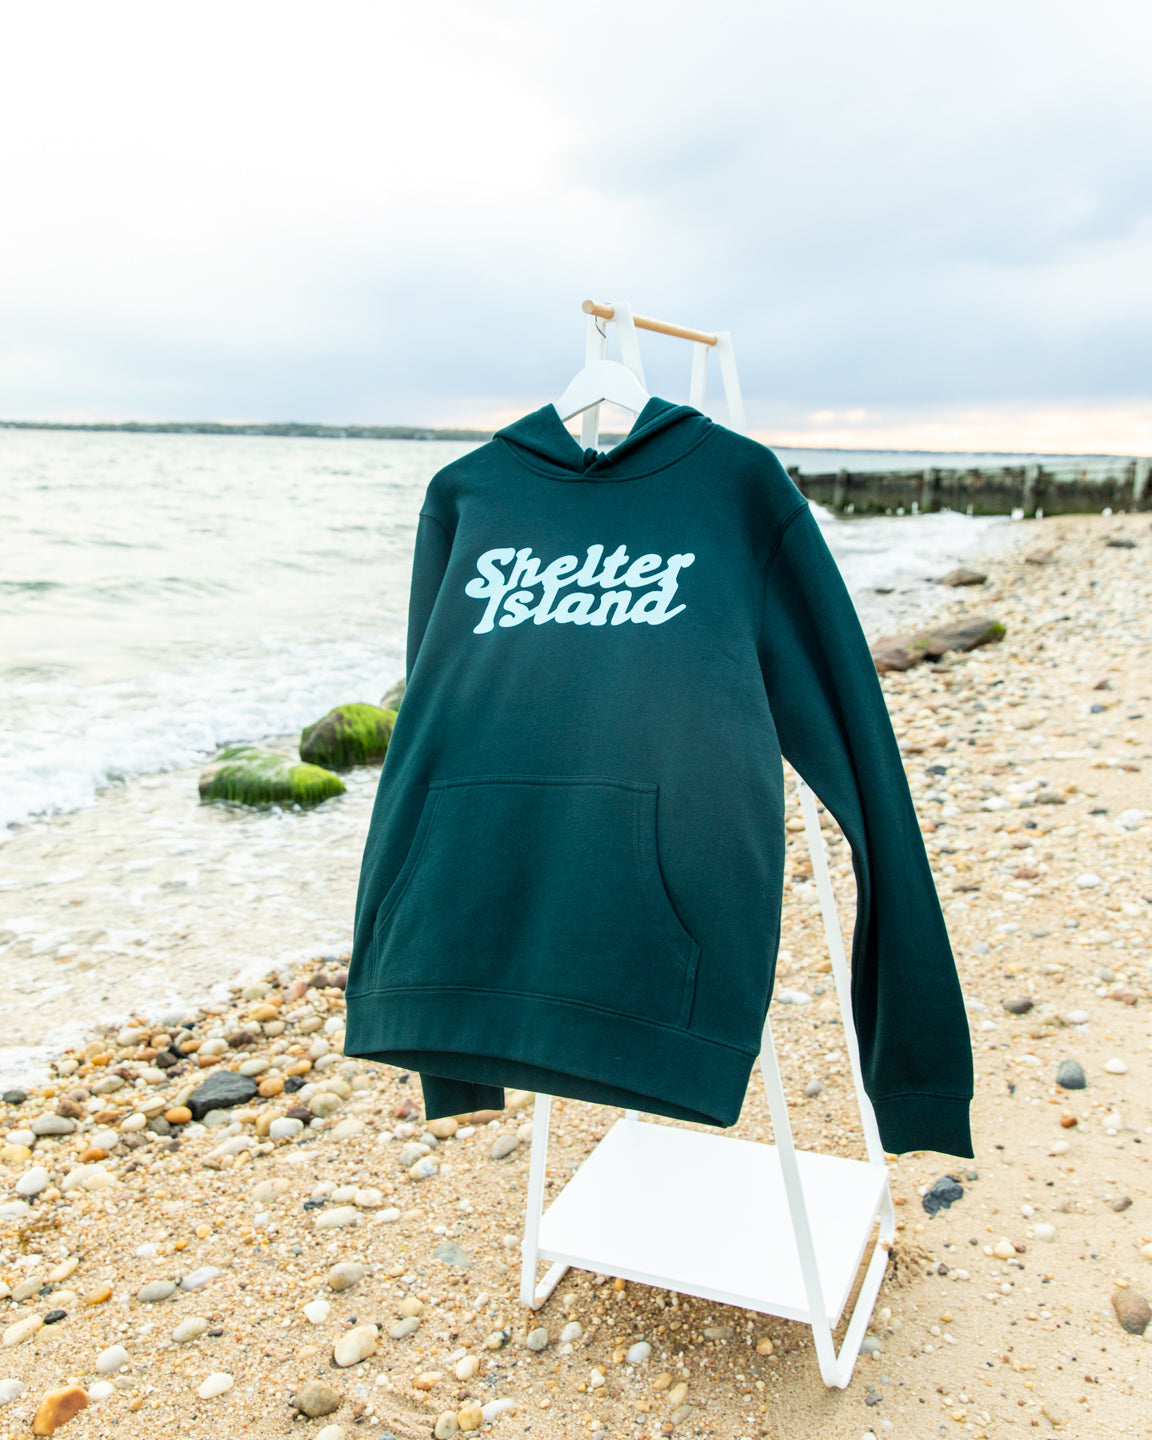 Shelter Isle x The Perlman Music Program collection by Shelter Island  Clothing boutique, Shelter Isle